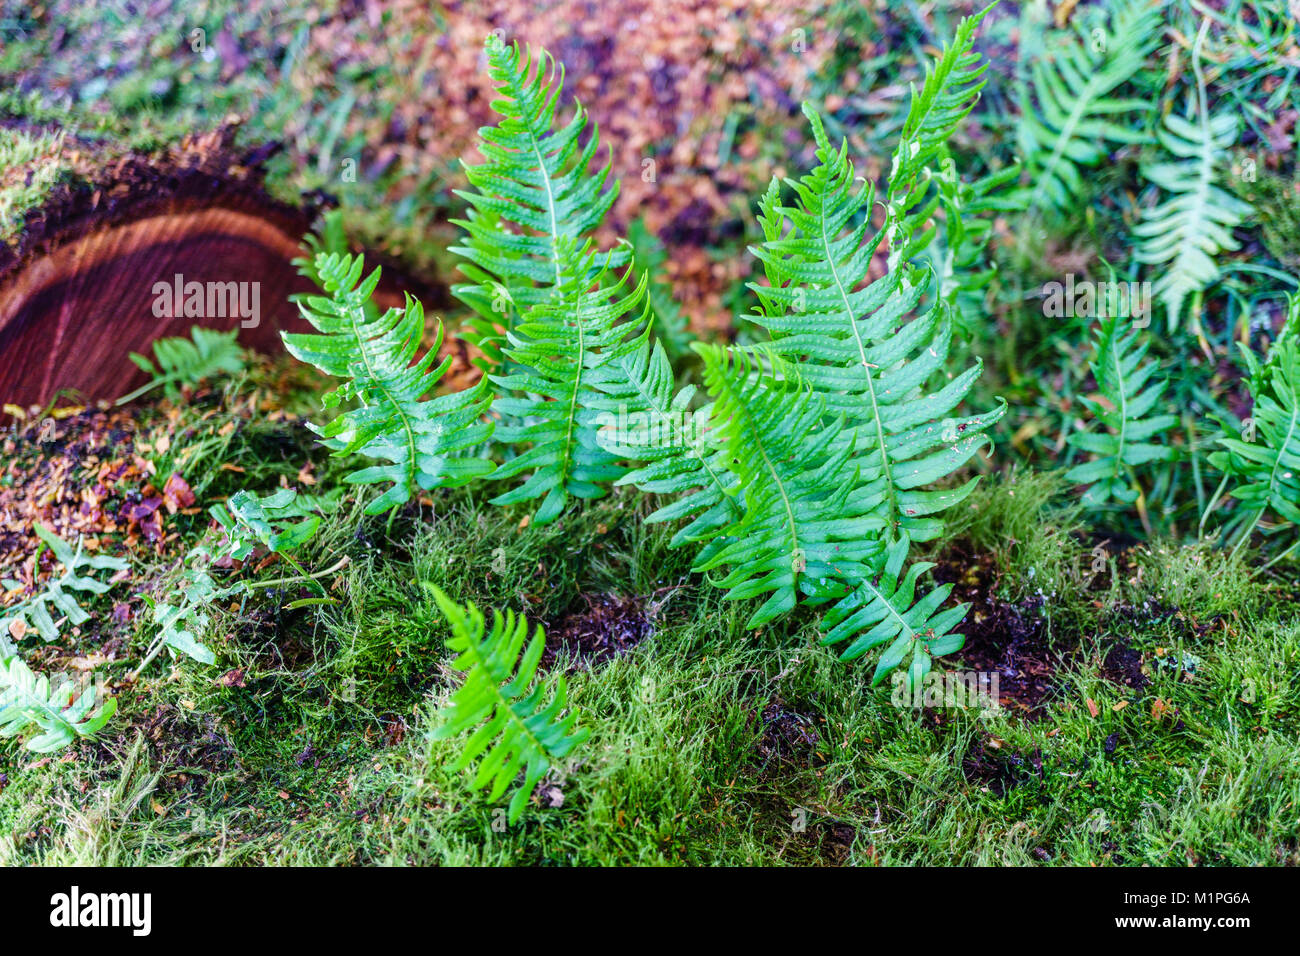 Fresh green sprout of fern on an old tree in the forest. Stock Photo